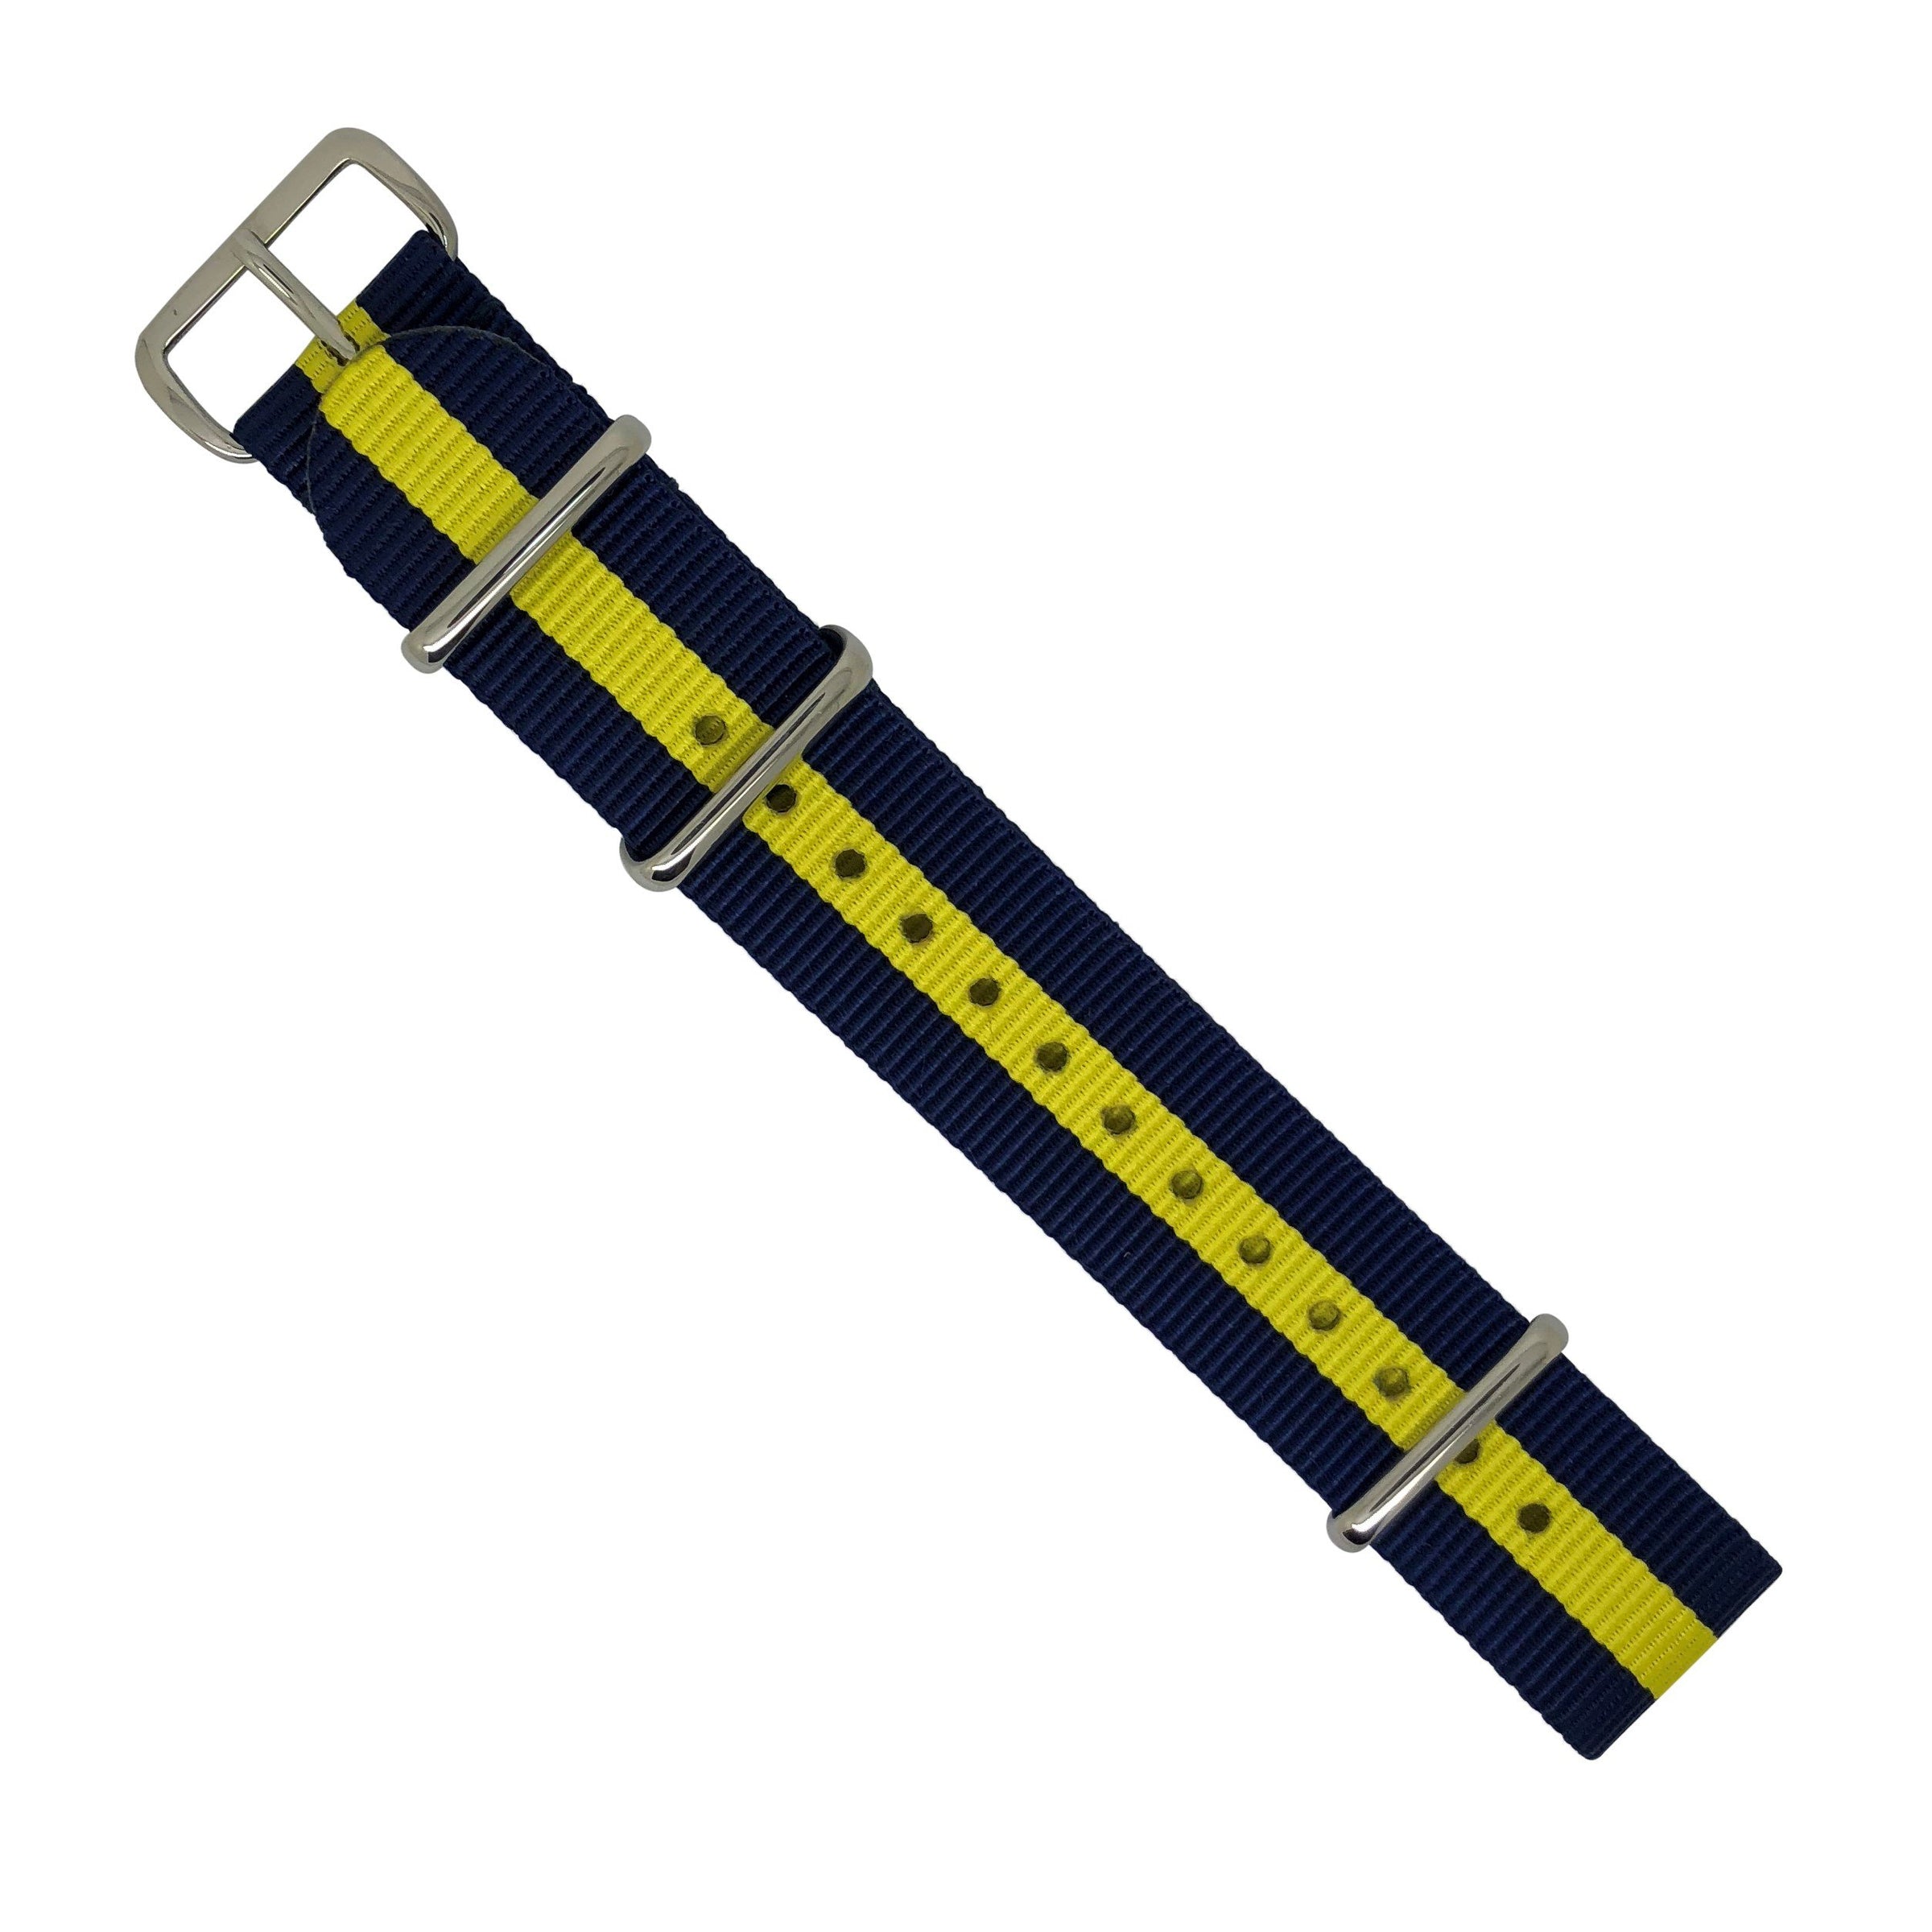 Premium Nato Strap in Navy Yellow with Polished Silver Buckle (20mm) - Nomadstore Singapore